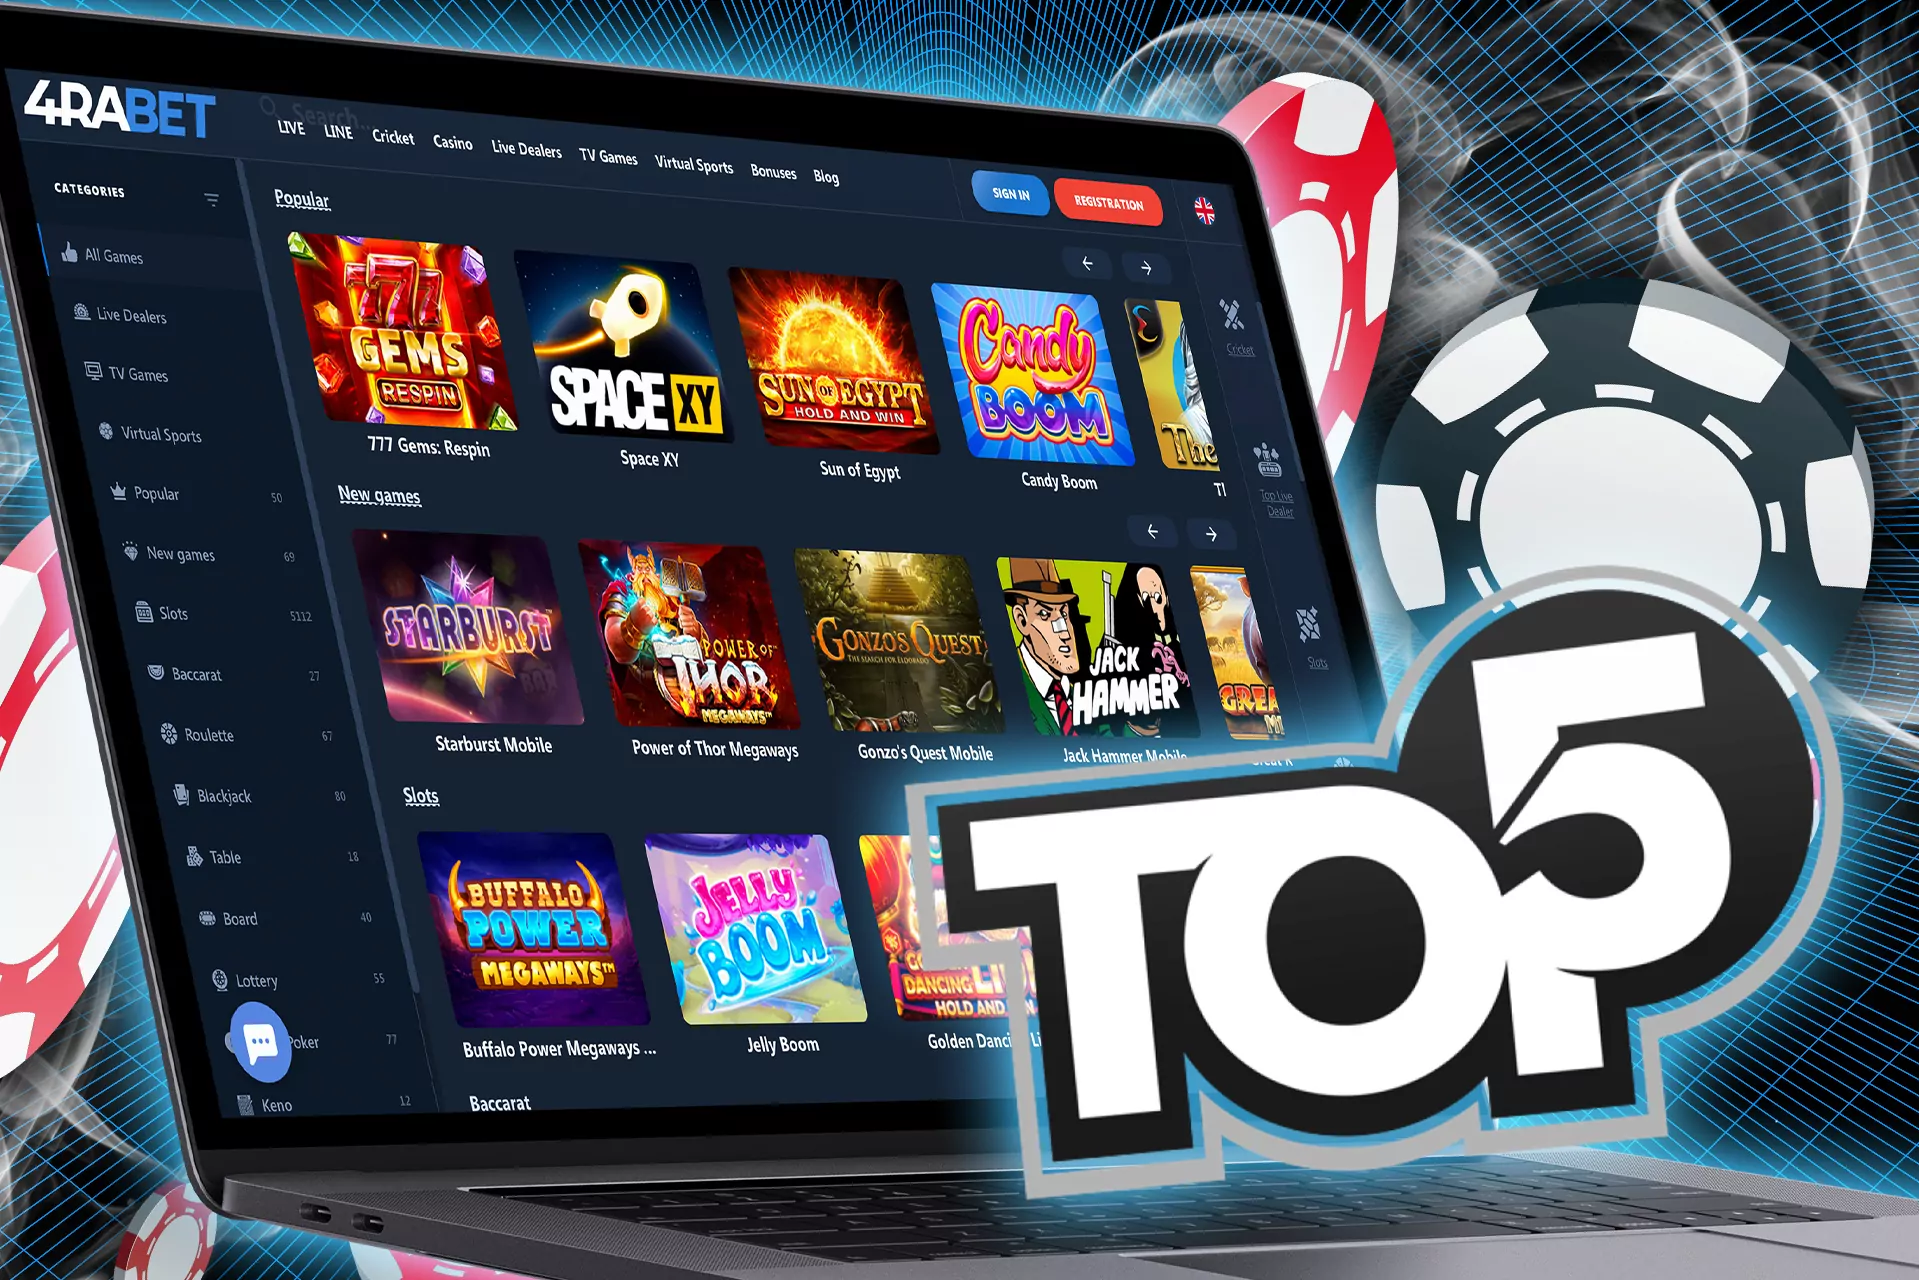 Top 5 most popular games in our casino.